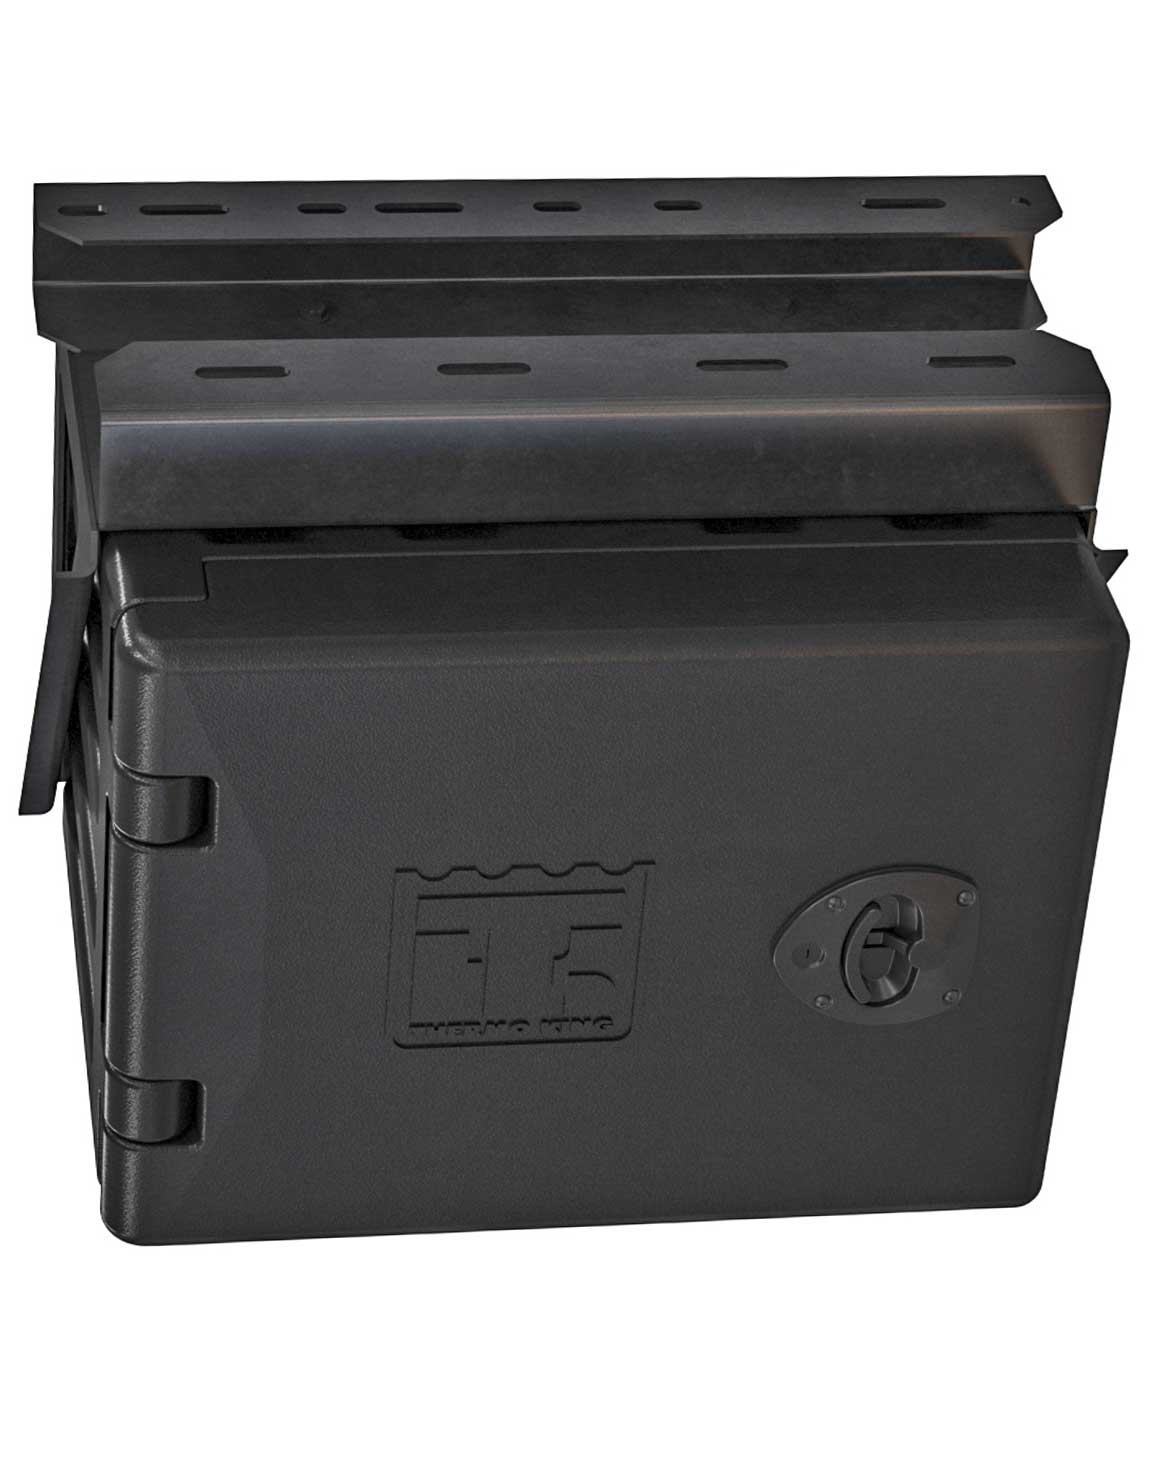 Electric Pallet EPJ Charger product image